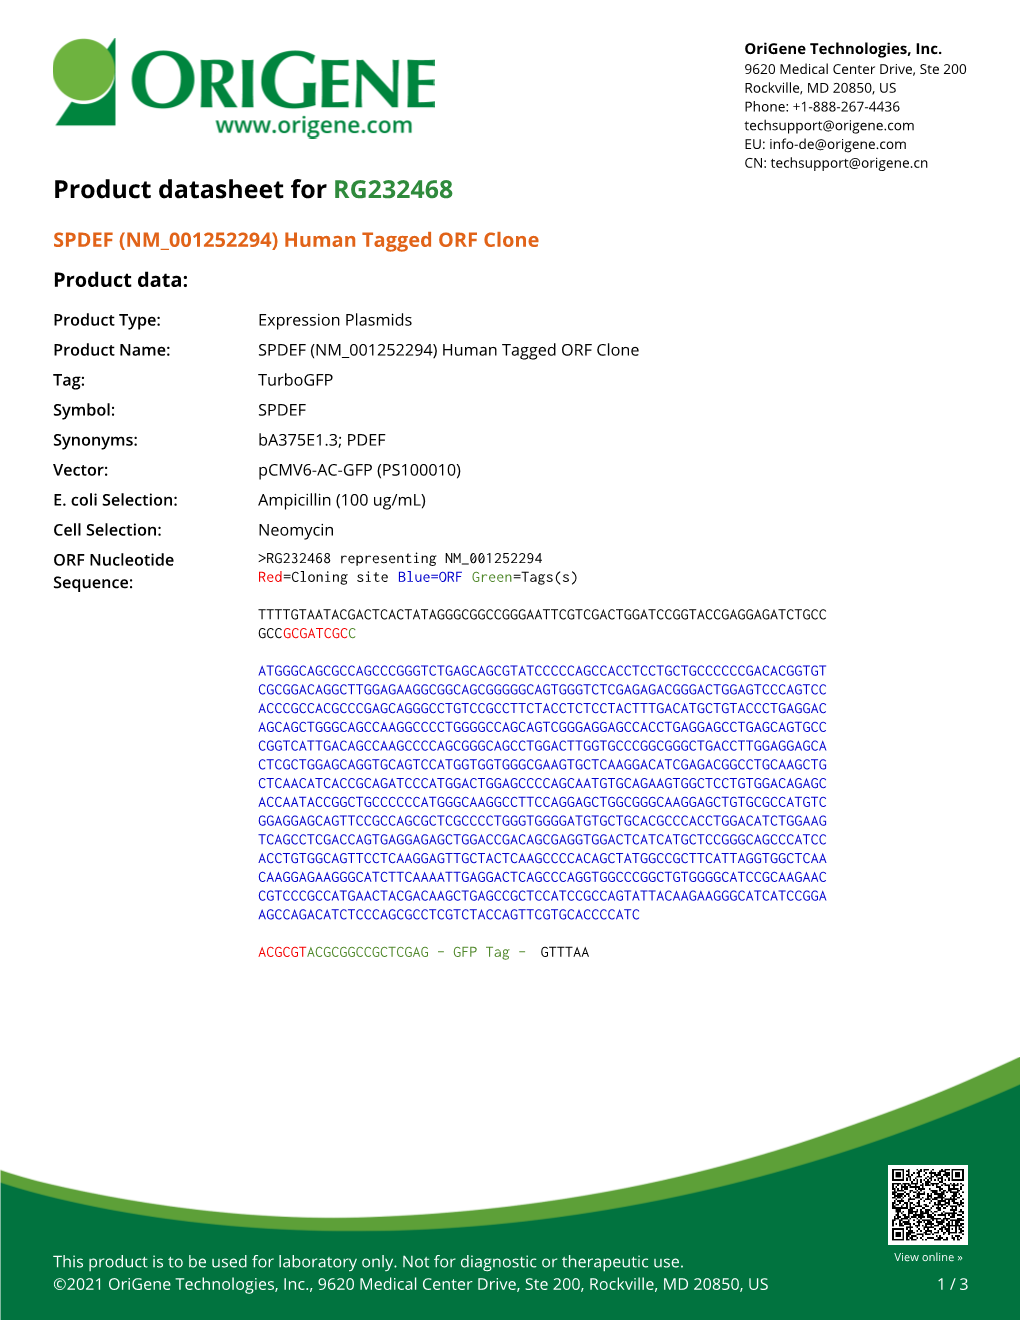 SPDEF (NM 001252294) Human Tagged ORF Clone Product Data